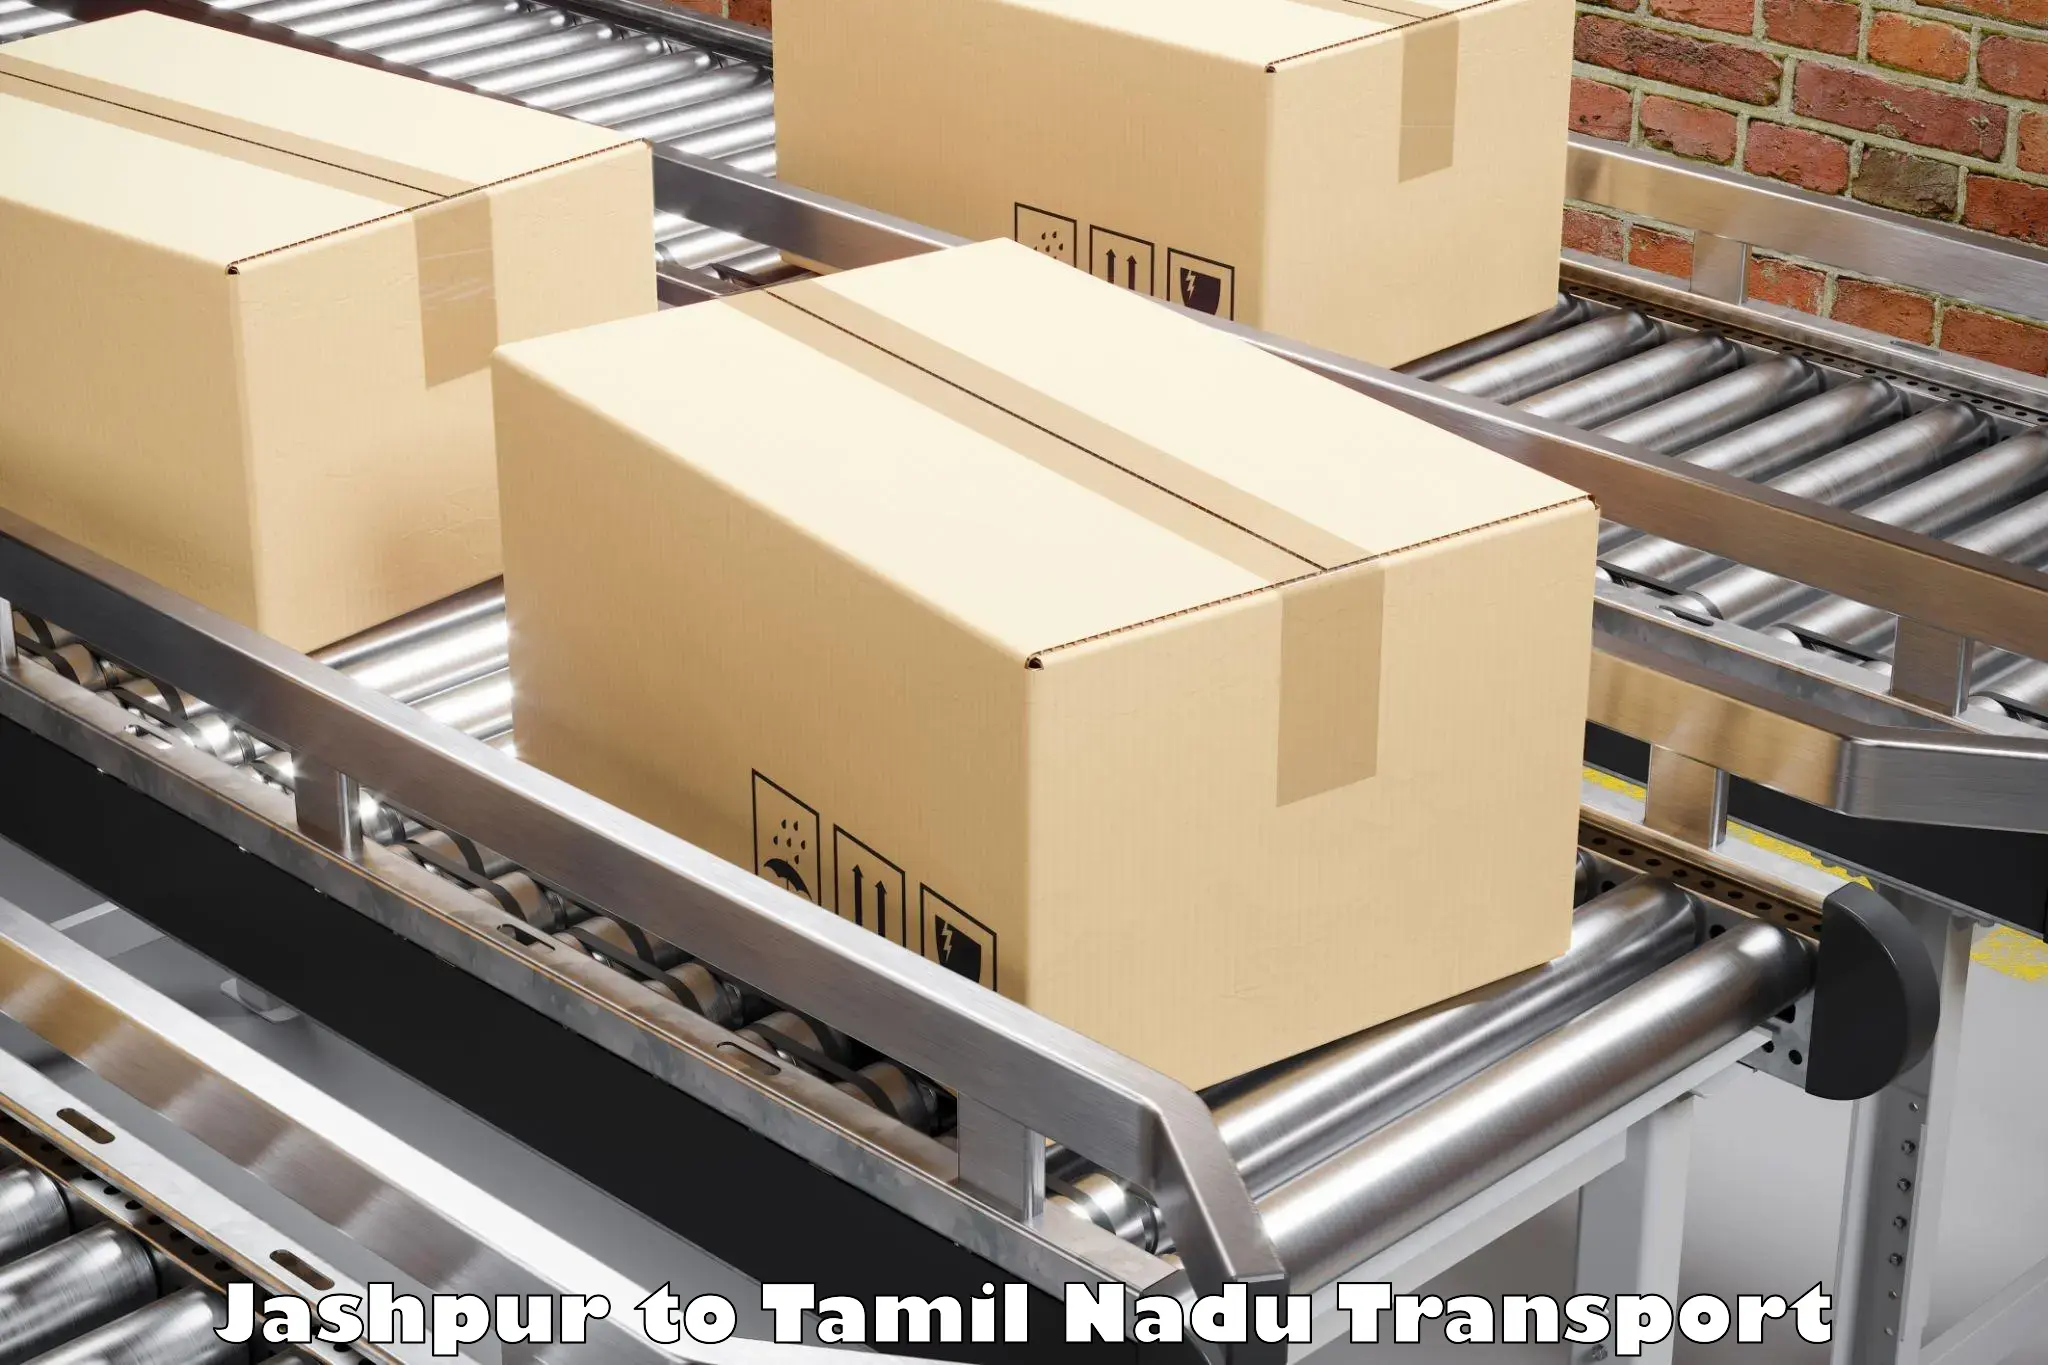 Container transport service Jashpur to SRM Institute of Science and Technology Chennai